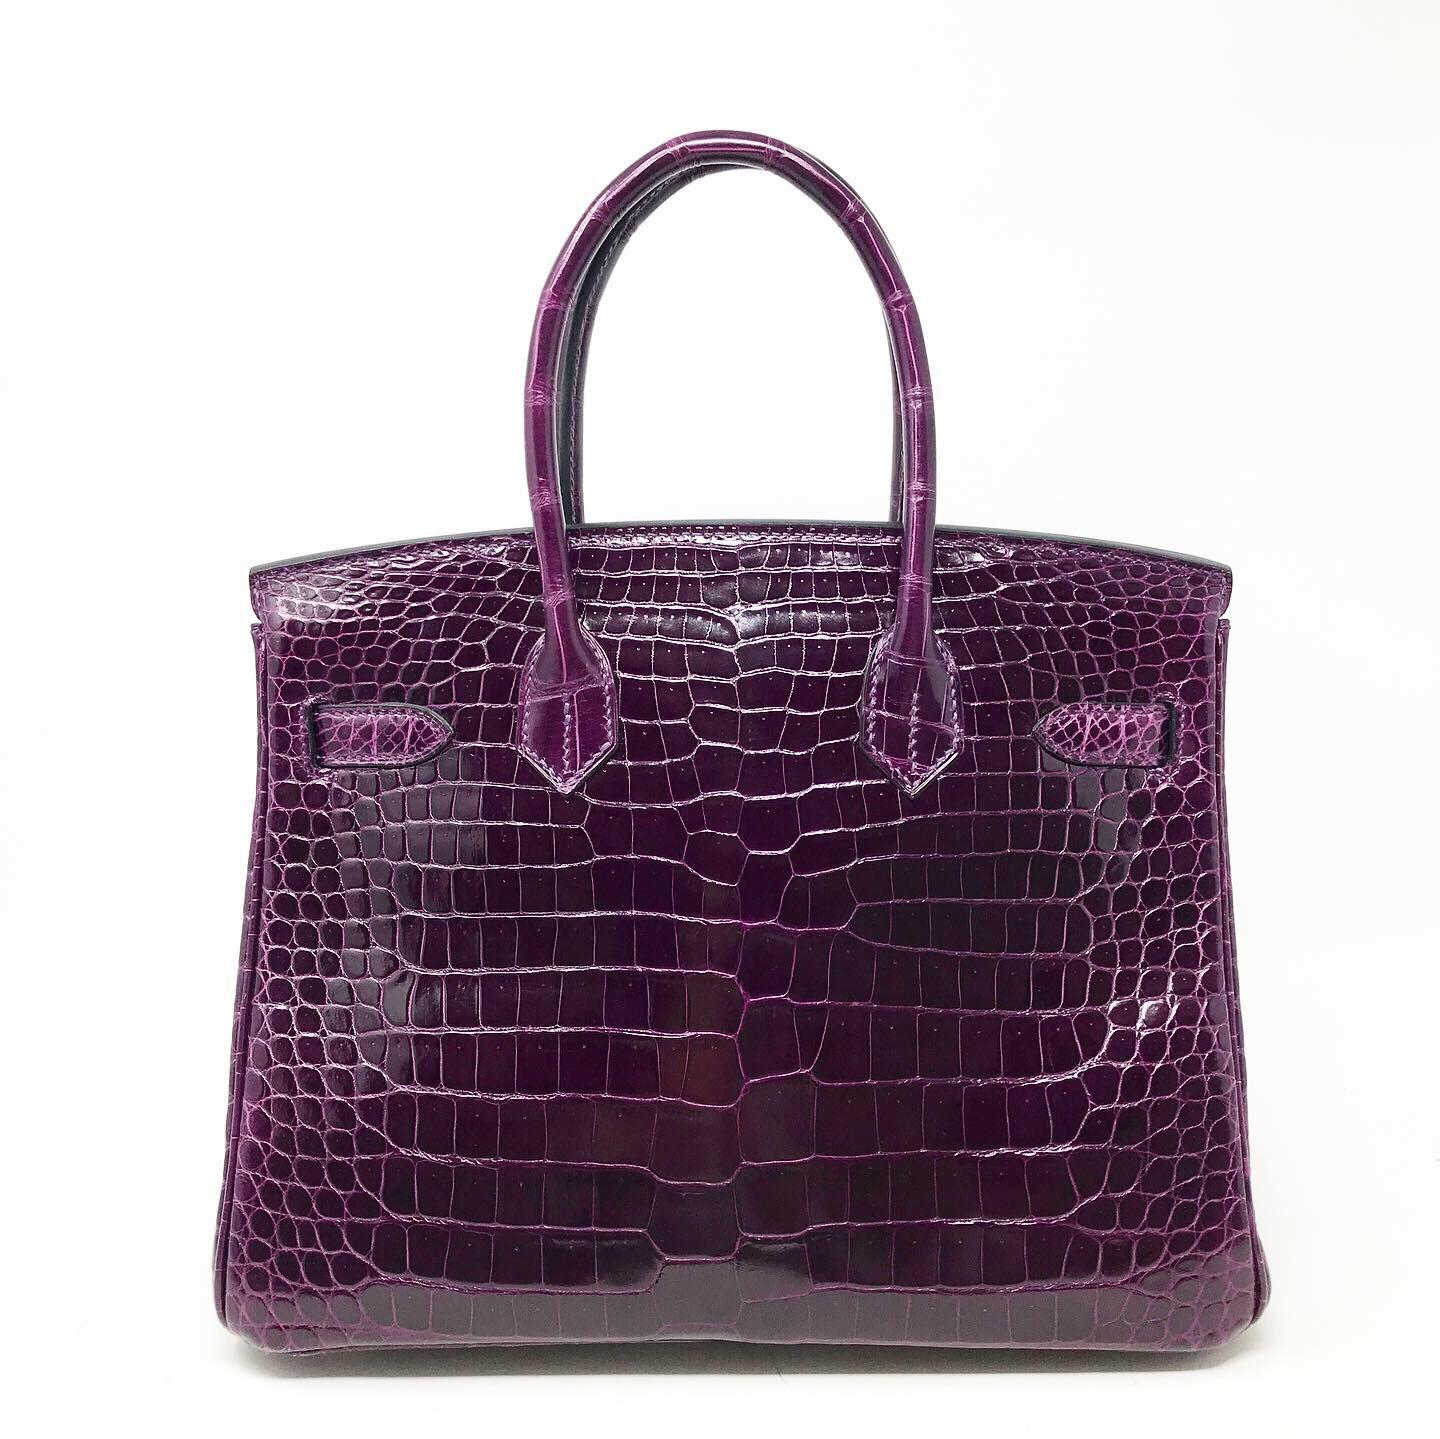 Hermès Paris Sac Birkin 30  Porosus crocodile Amethyst color Hdw silver Year of production 2012 Clochette, padlock and keys Very good condition Dust-bag included, slight signs of wear on the whole bag in excellent condition. 
